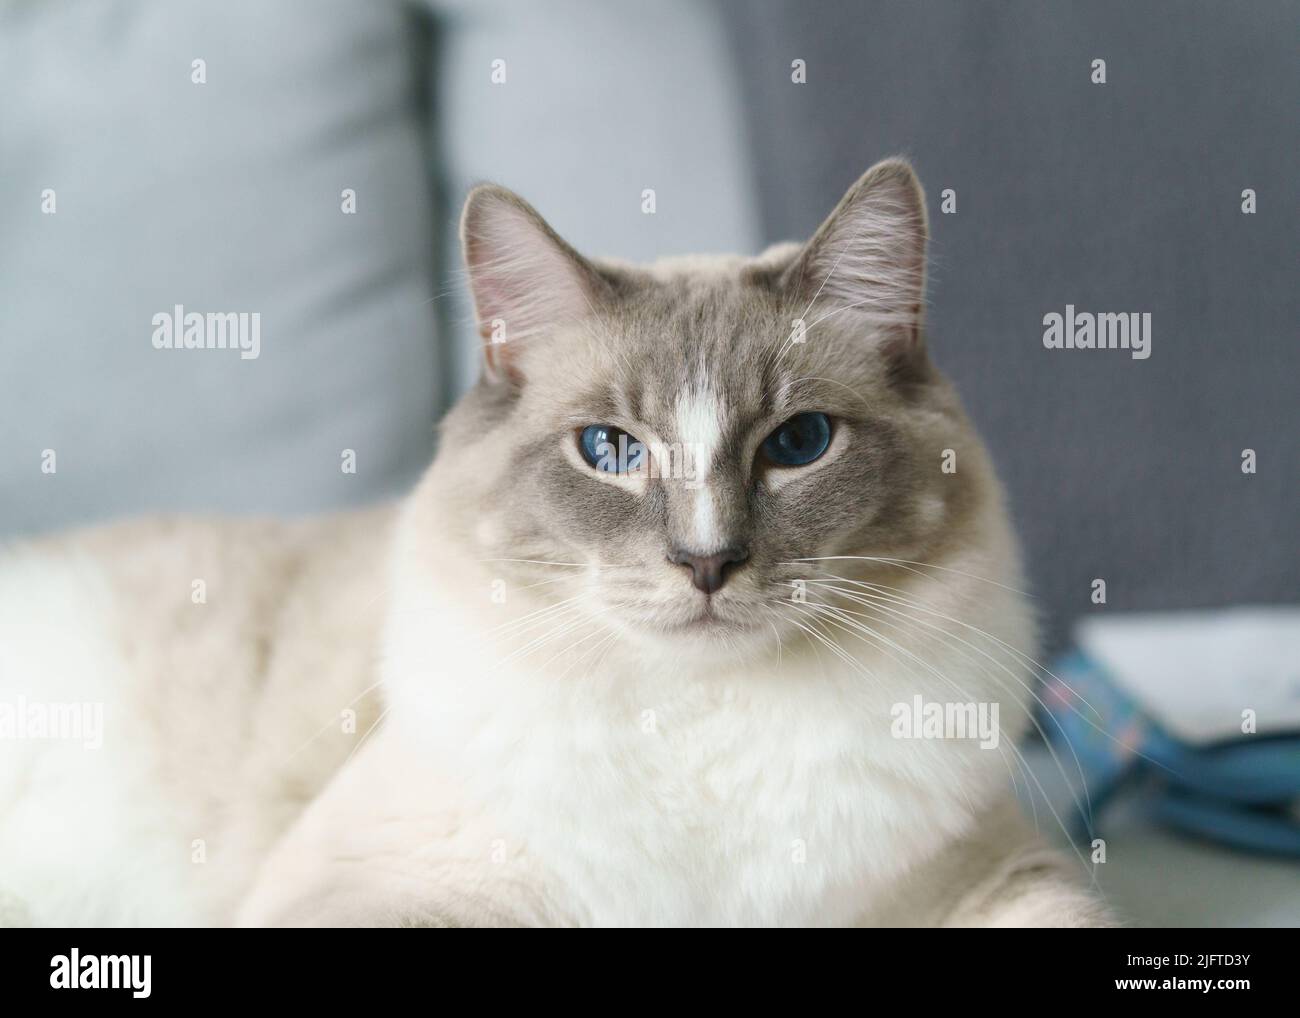 A Rag Doll domestic cat with blonde, grey and dark fur, and bright blue eyes. Stock Photo